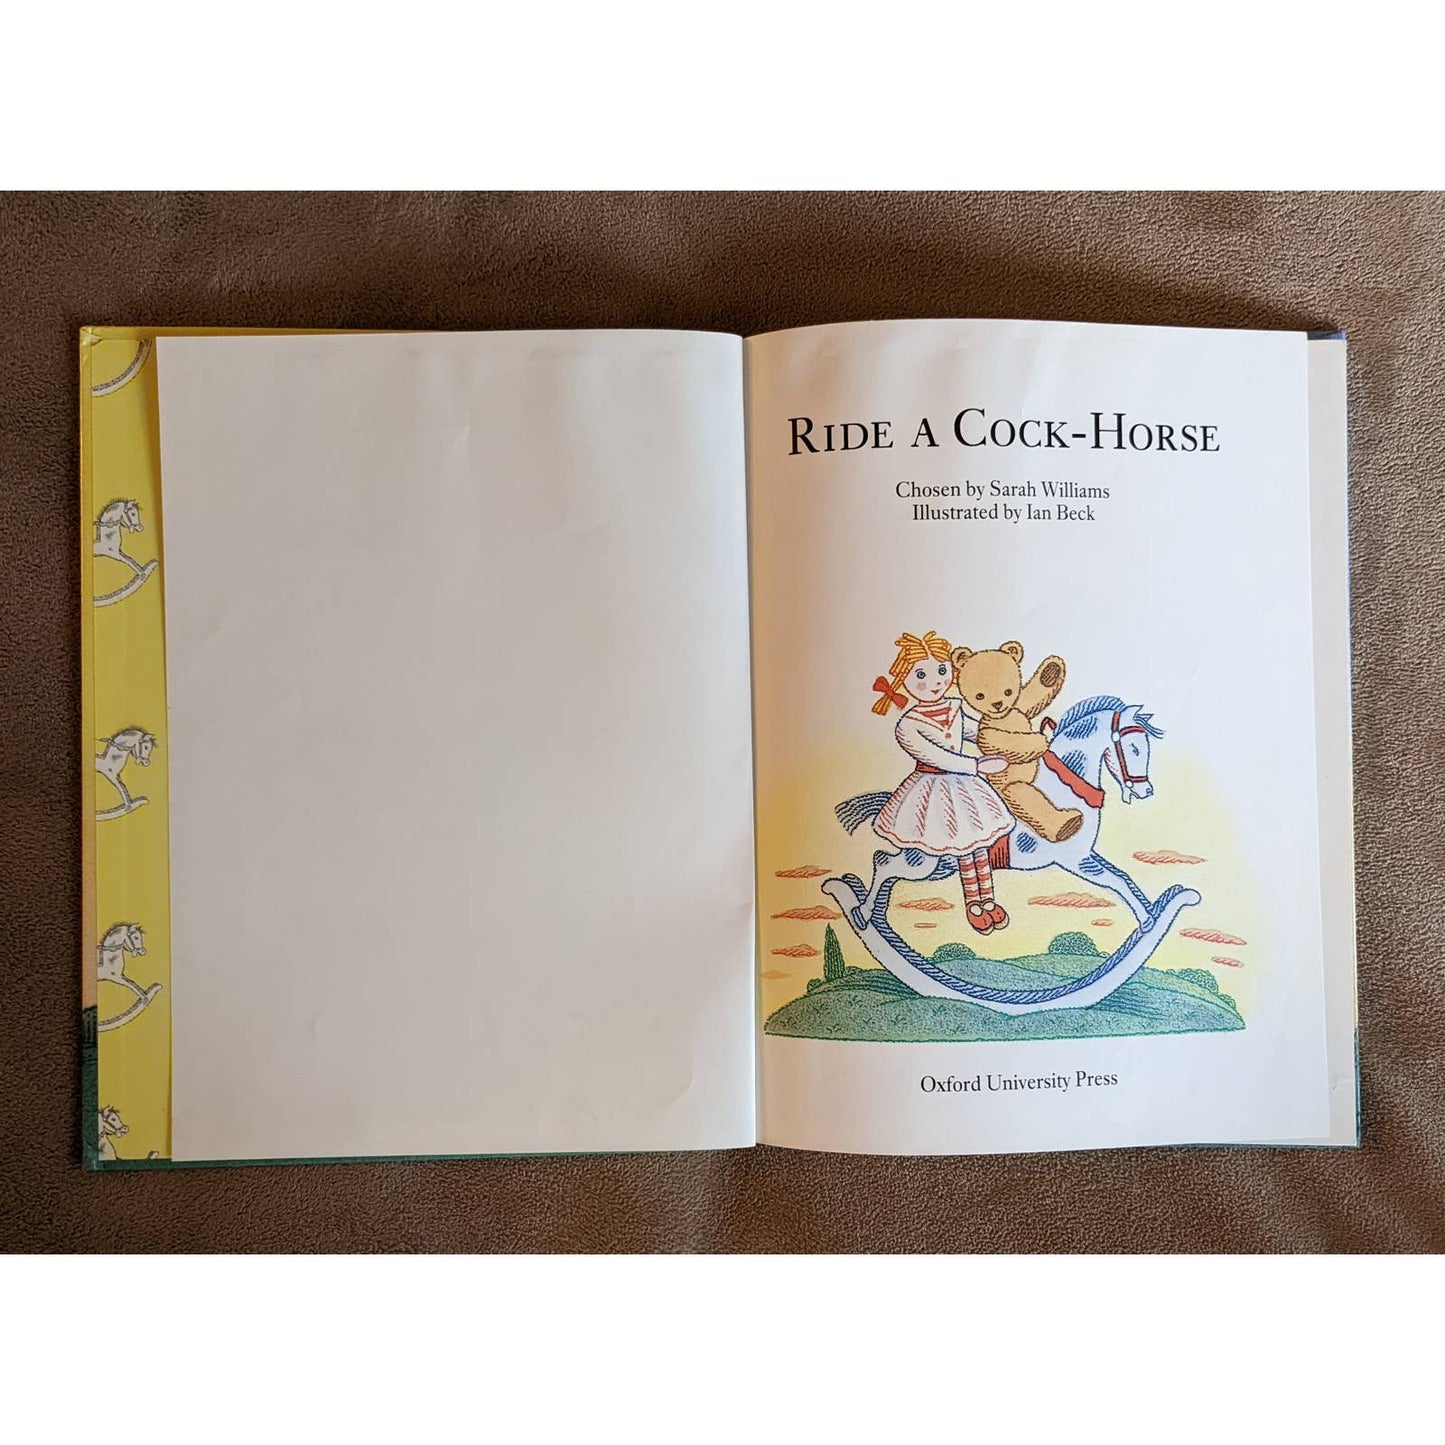 Ride A Horse: Jogging Rhymes, Lullabies 1986 Illustrated Bedtime Reading